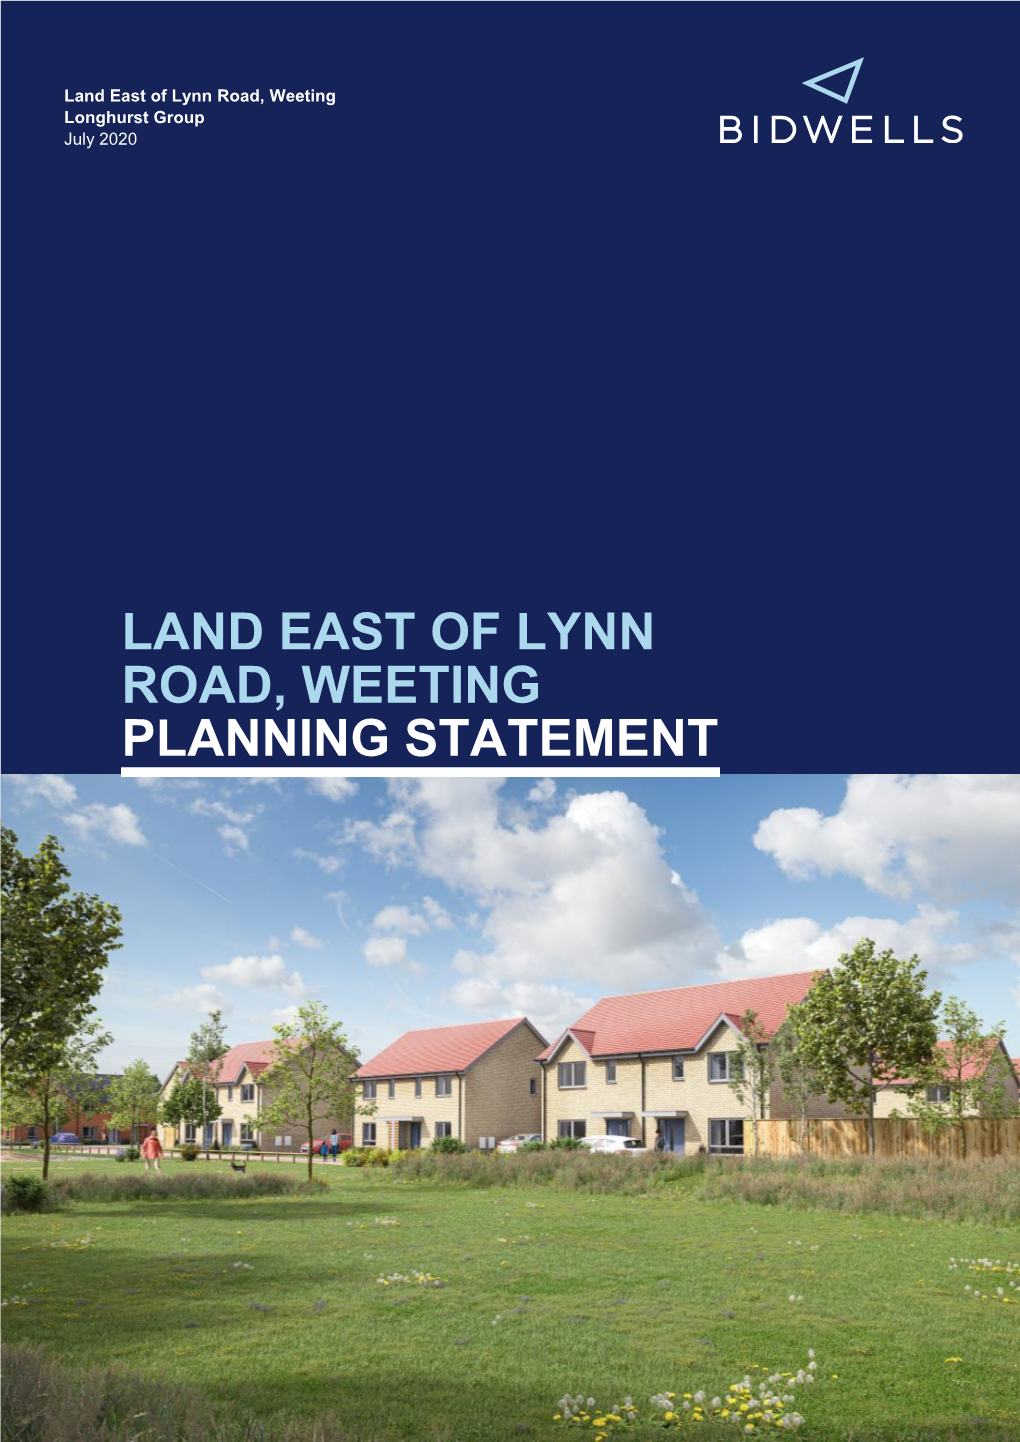 LAND EAST of LYNN ROAD, WEETING PLANNING STATEMENT Planning Statement - Land East of Lynn Road, Weeting